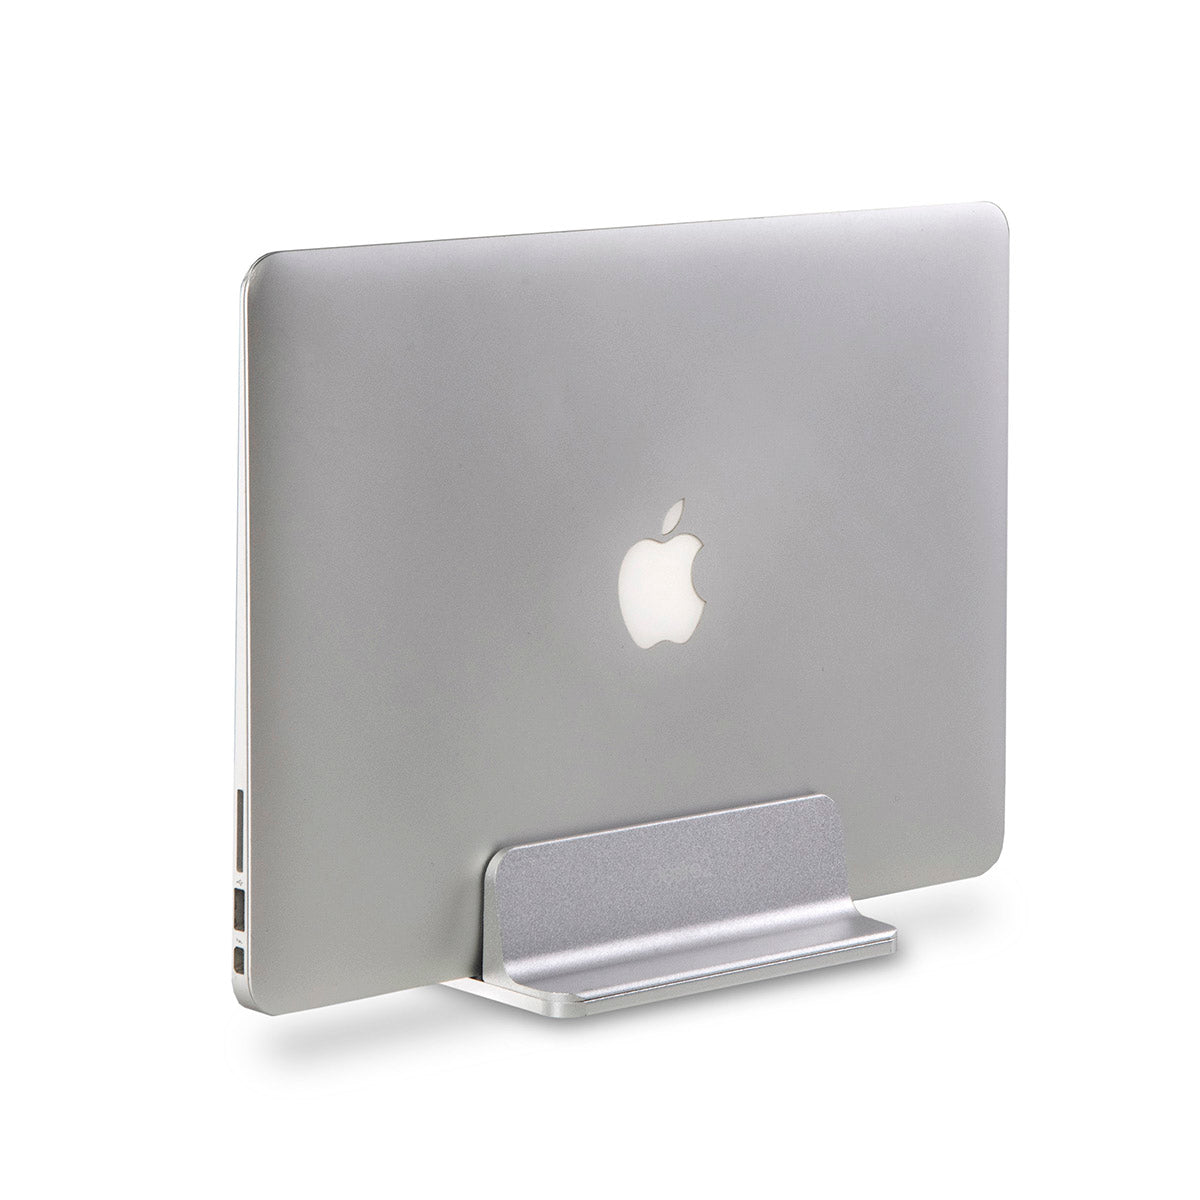 Apple Macbook held vertically upright in the closed position by a premium aluminium laptop stand  